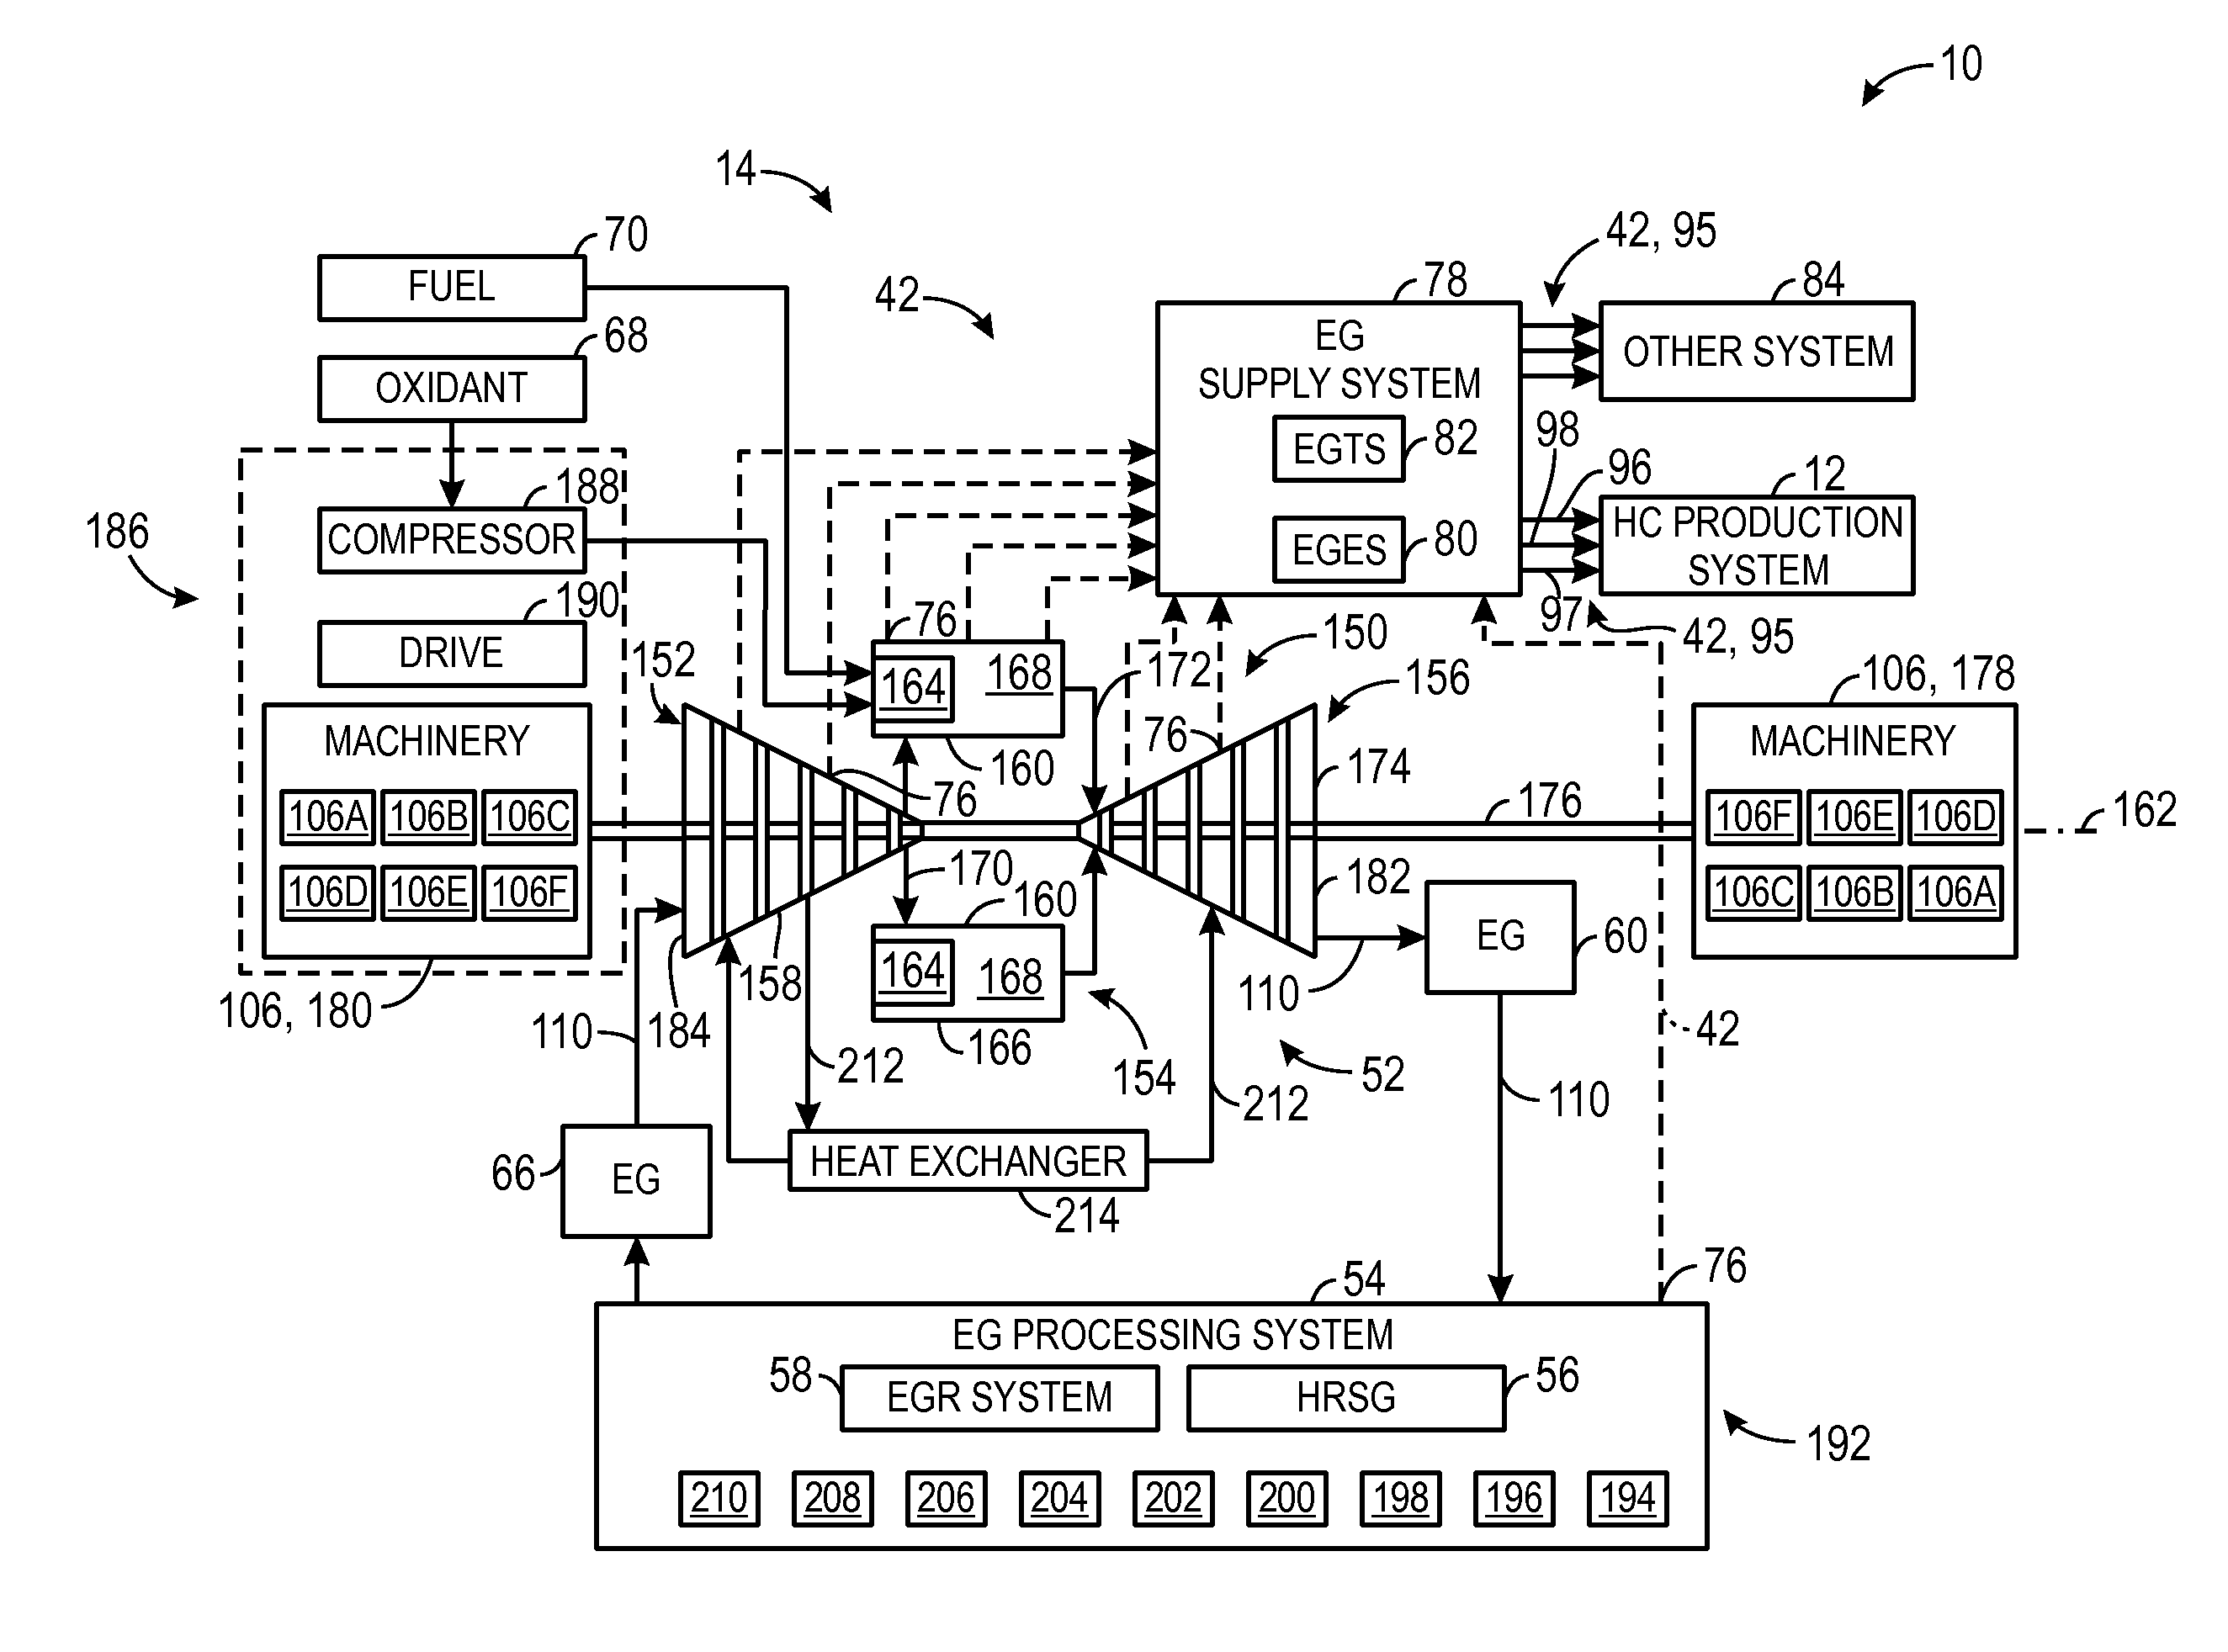 Gas turbine combustor diagnostic system and method